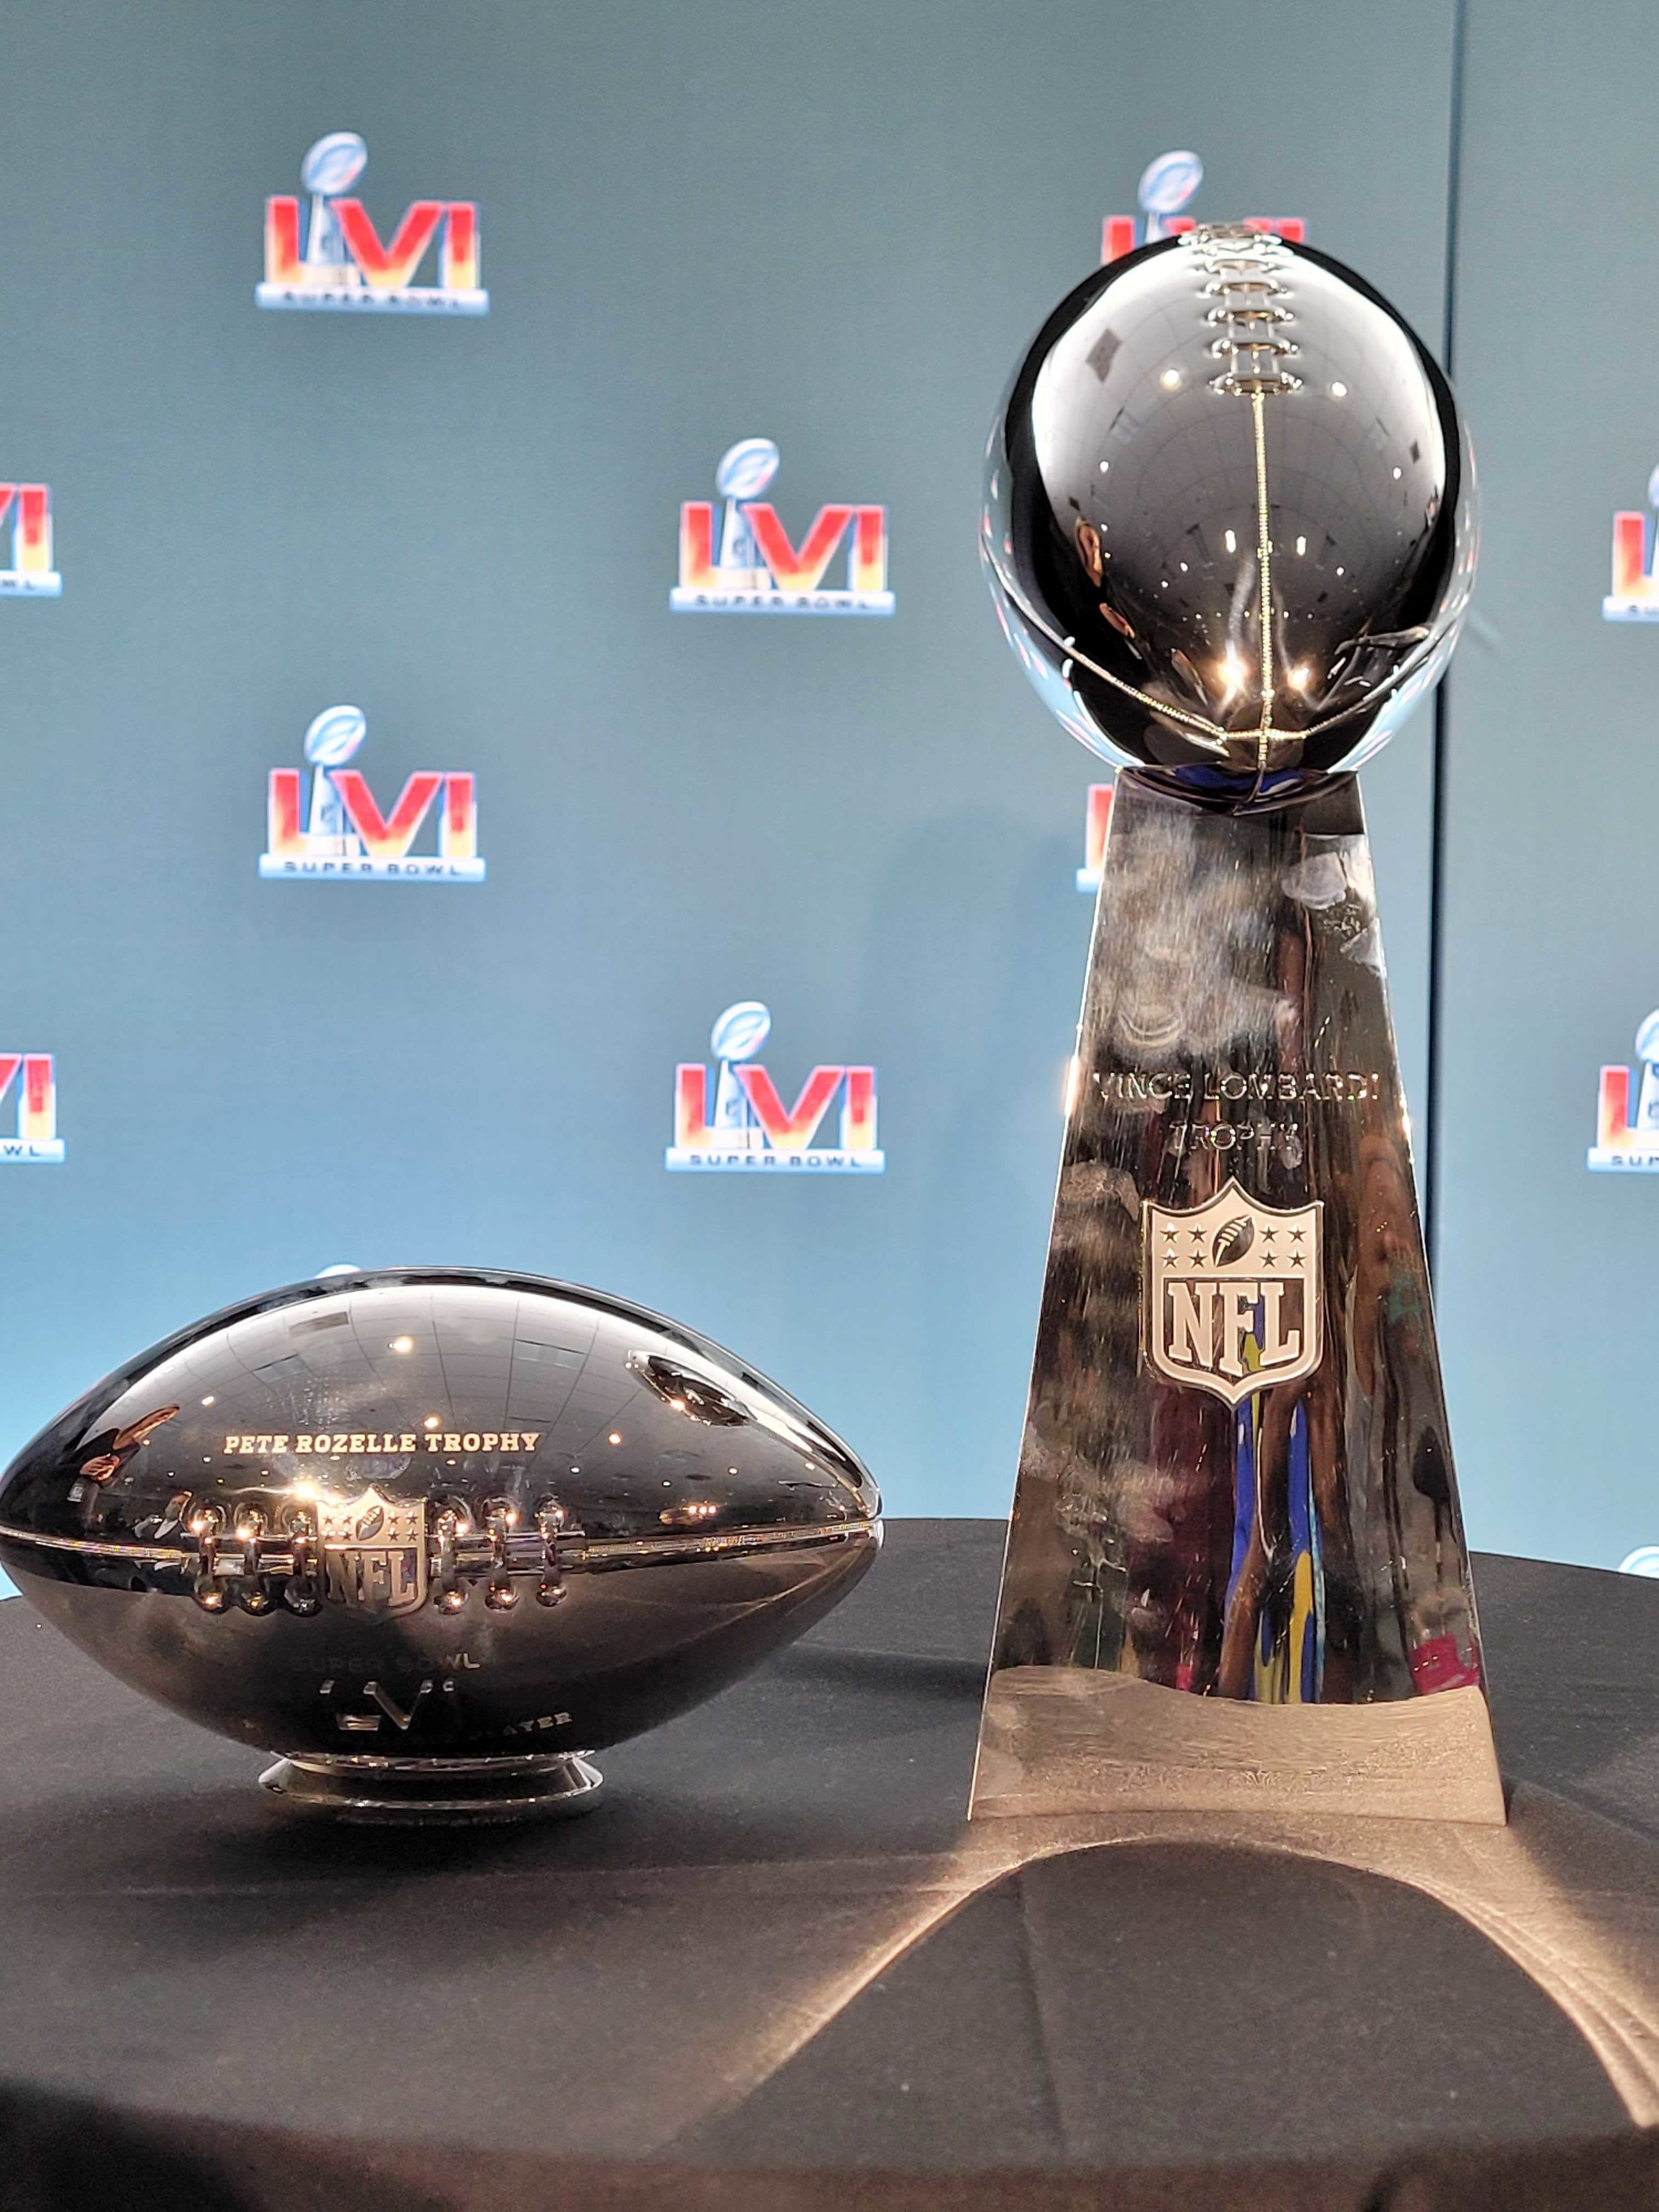 The Super Bowl MVP trophy and Championship trophy